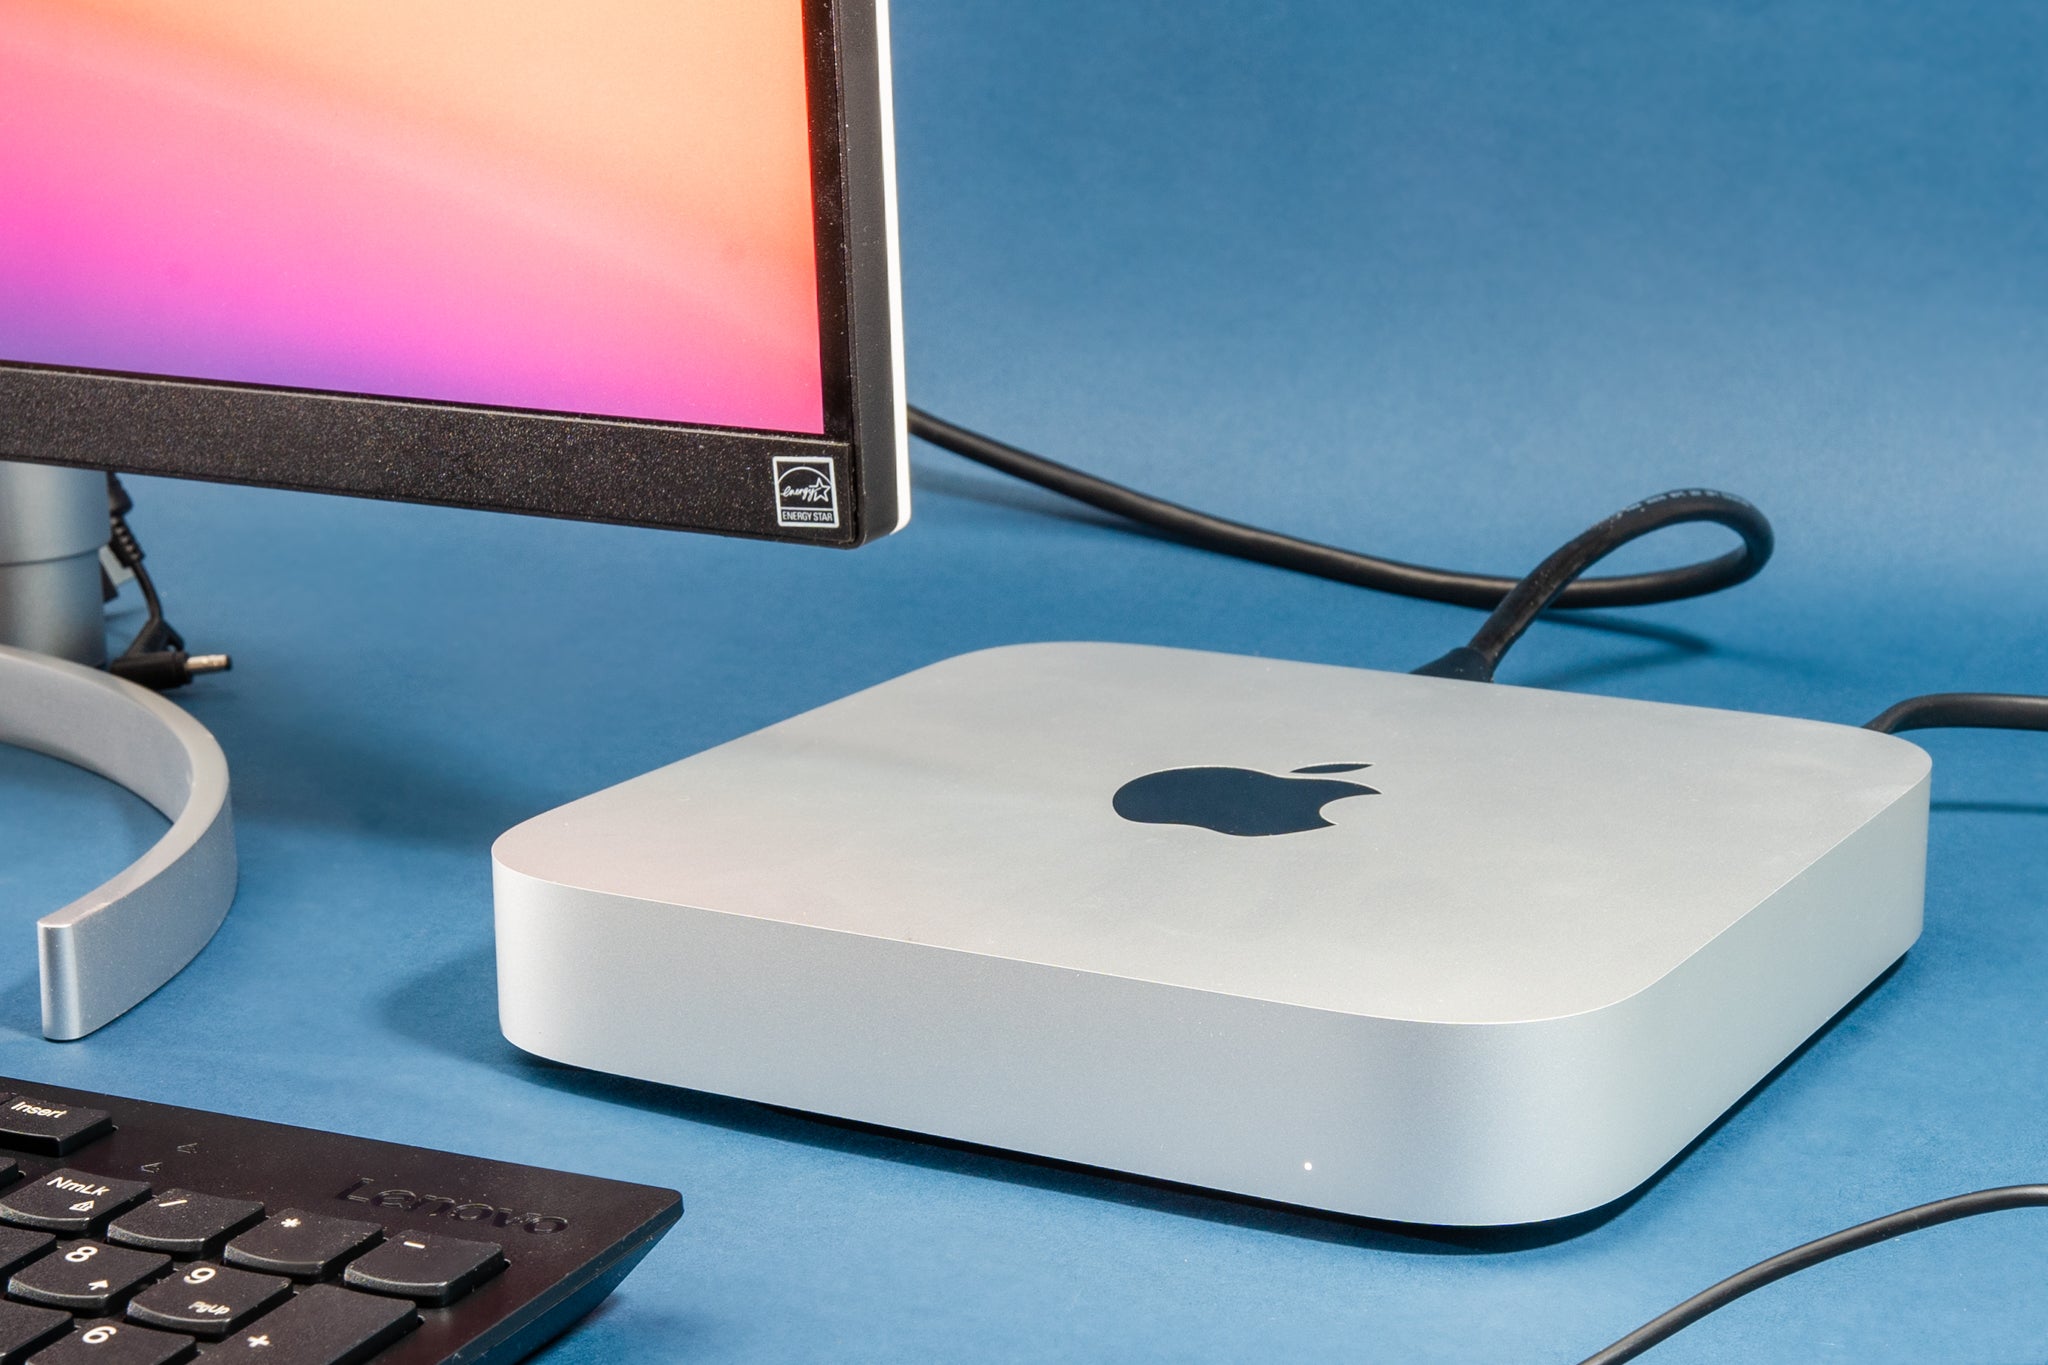 how fast is the mac mini 2015 for gaming